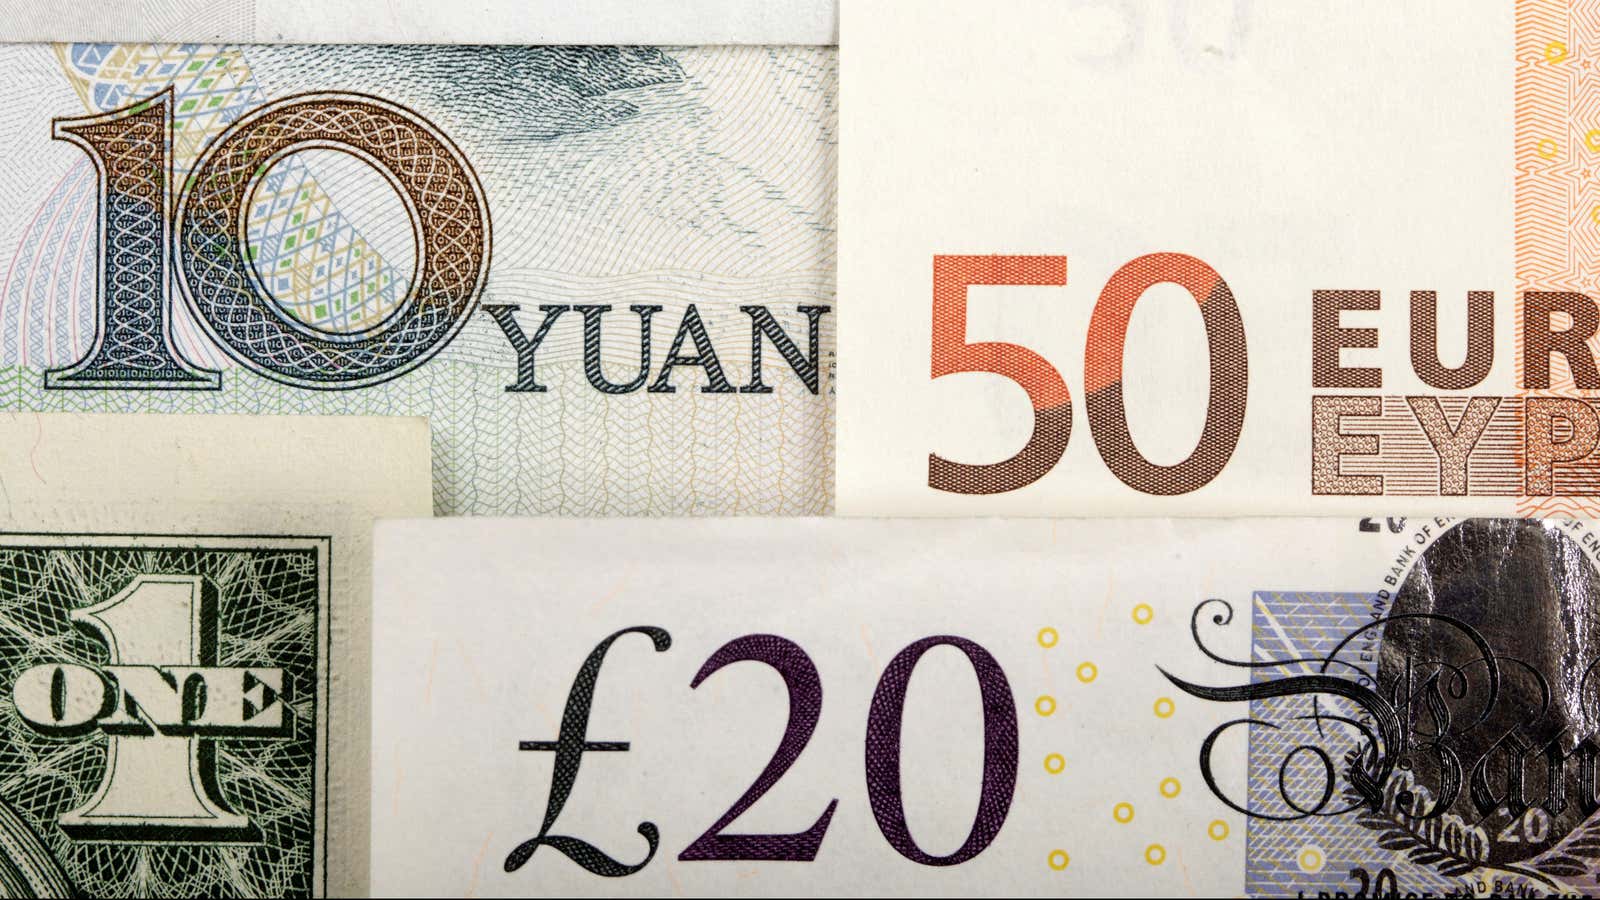 Arrangement of various world currencies including Chinese Yuan, US Dollar, Euro, British Pound, shot January 25, 2011. REUTERS/Kacper Pempel/Illustration/File Photo